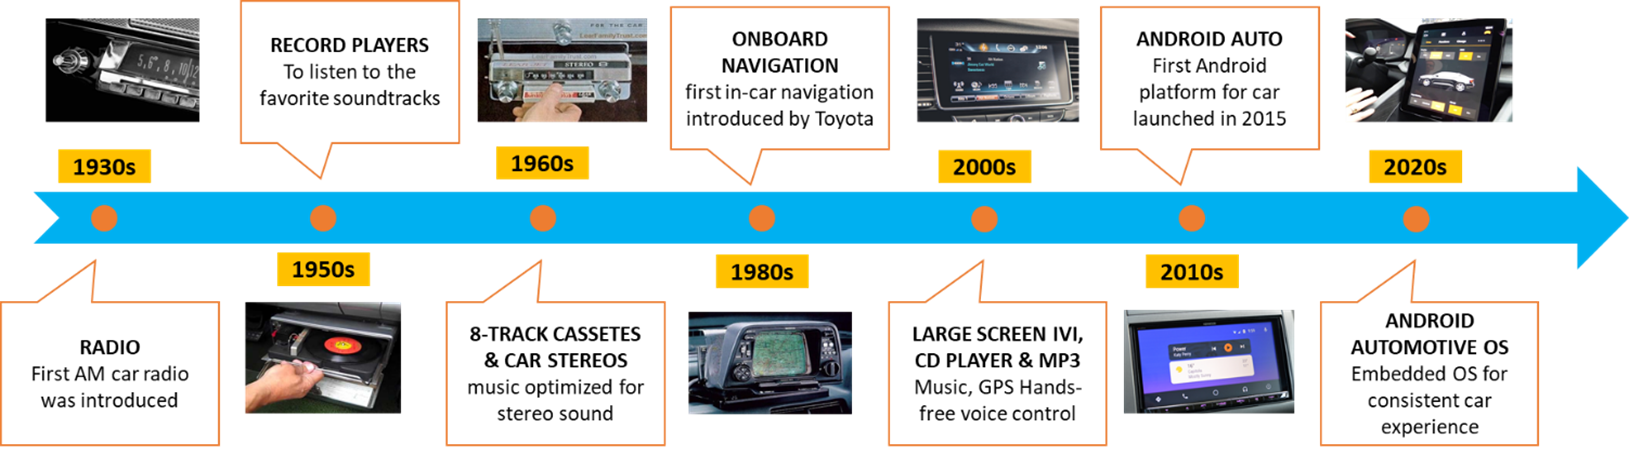 Evolution of Car infotainment systems